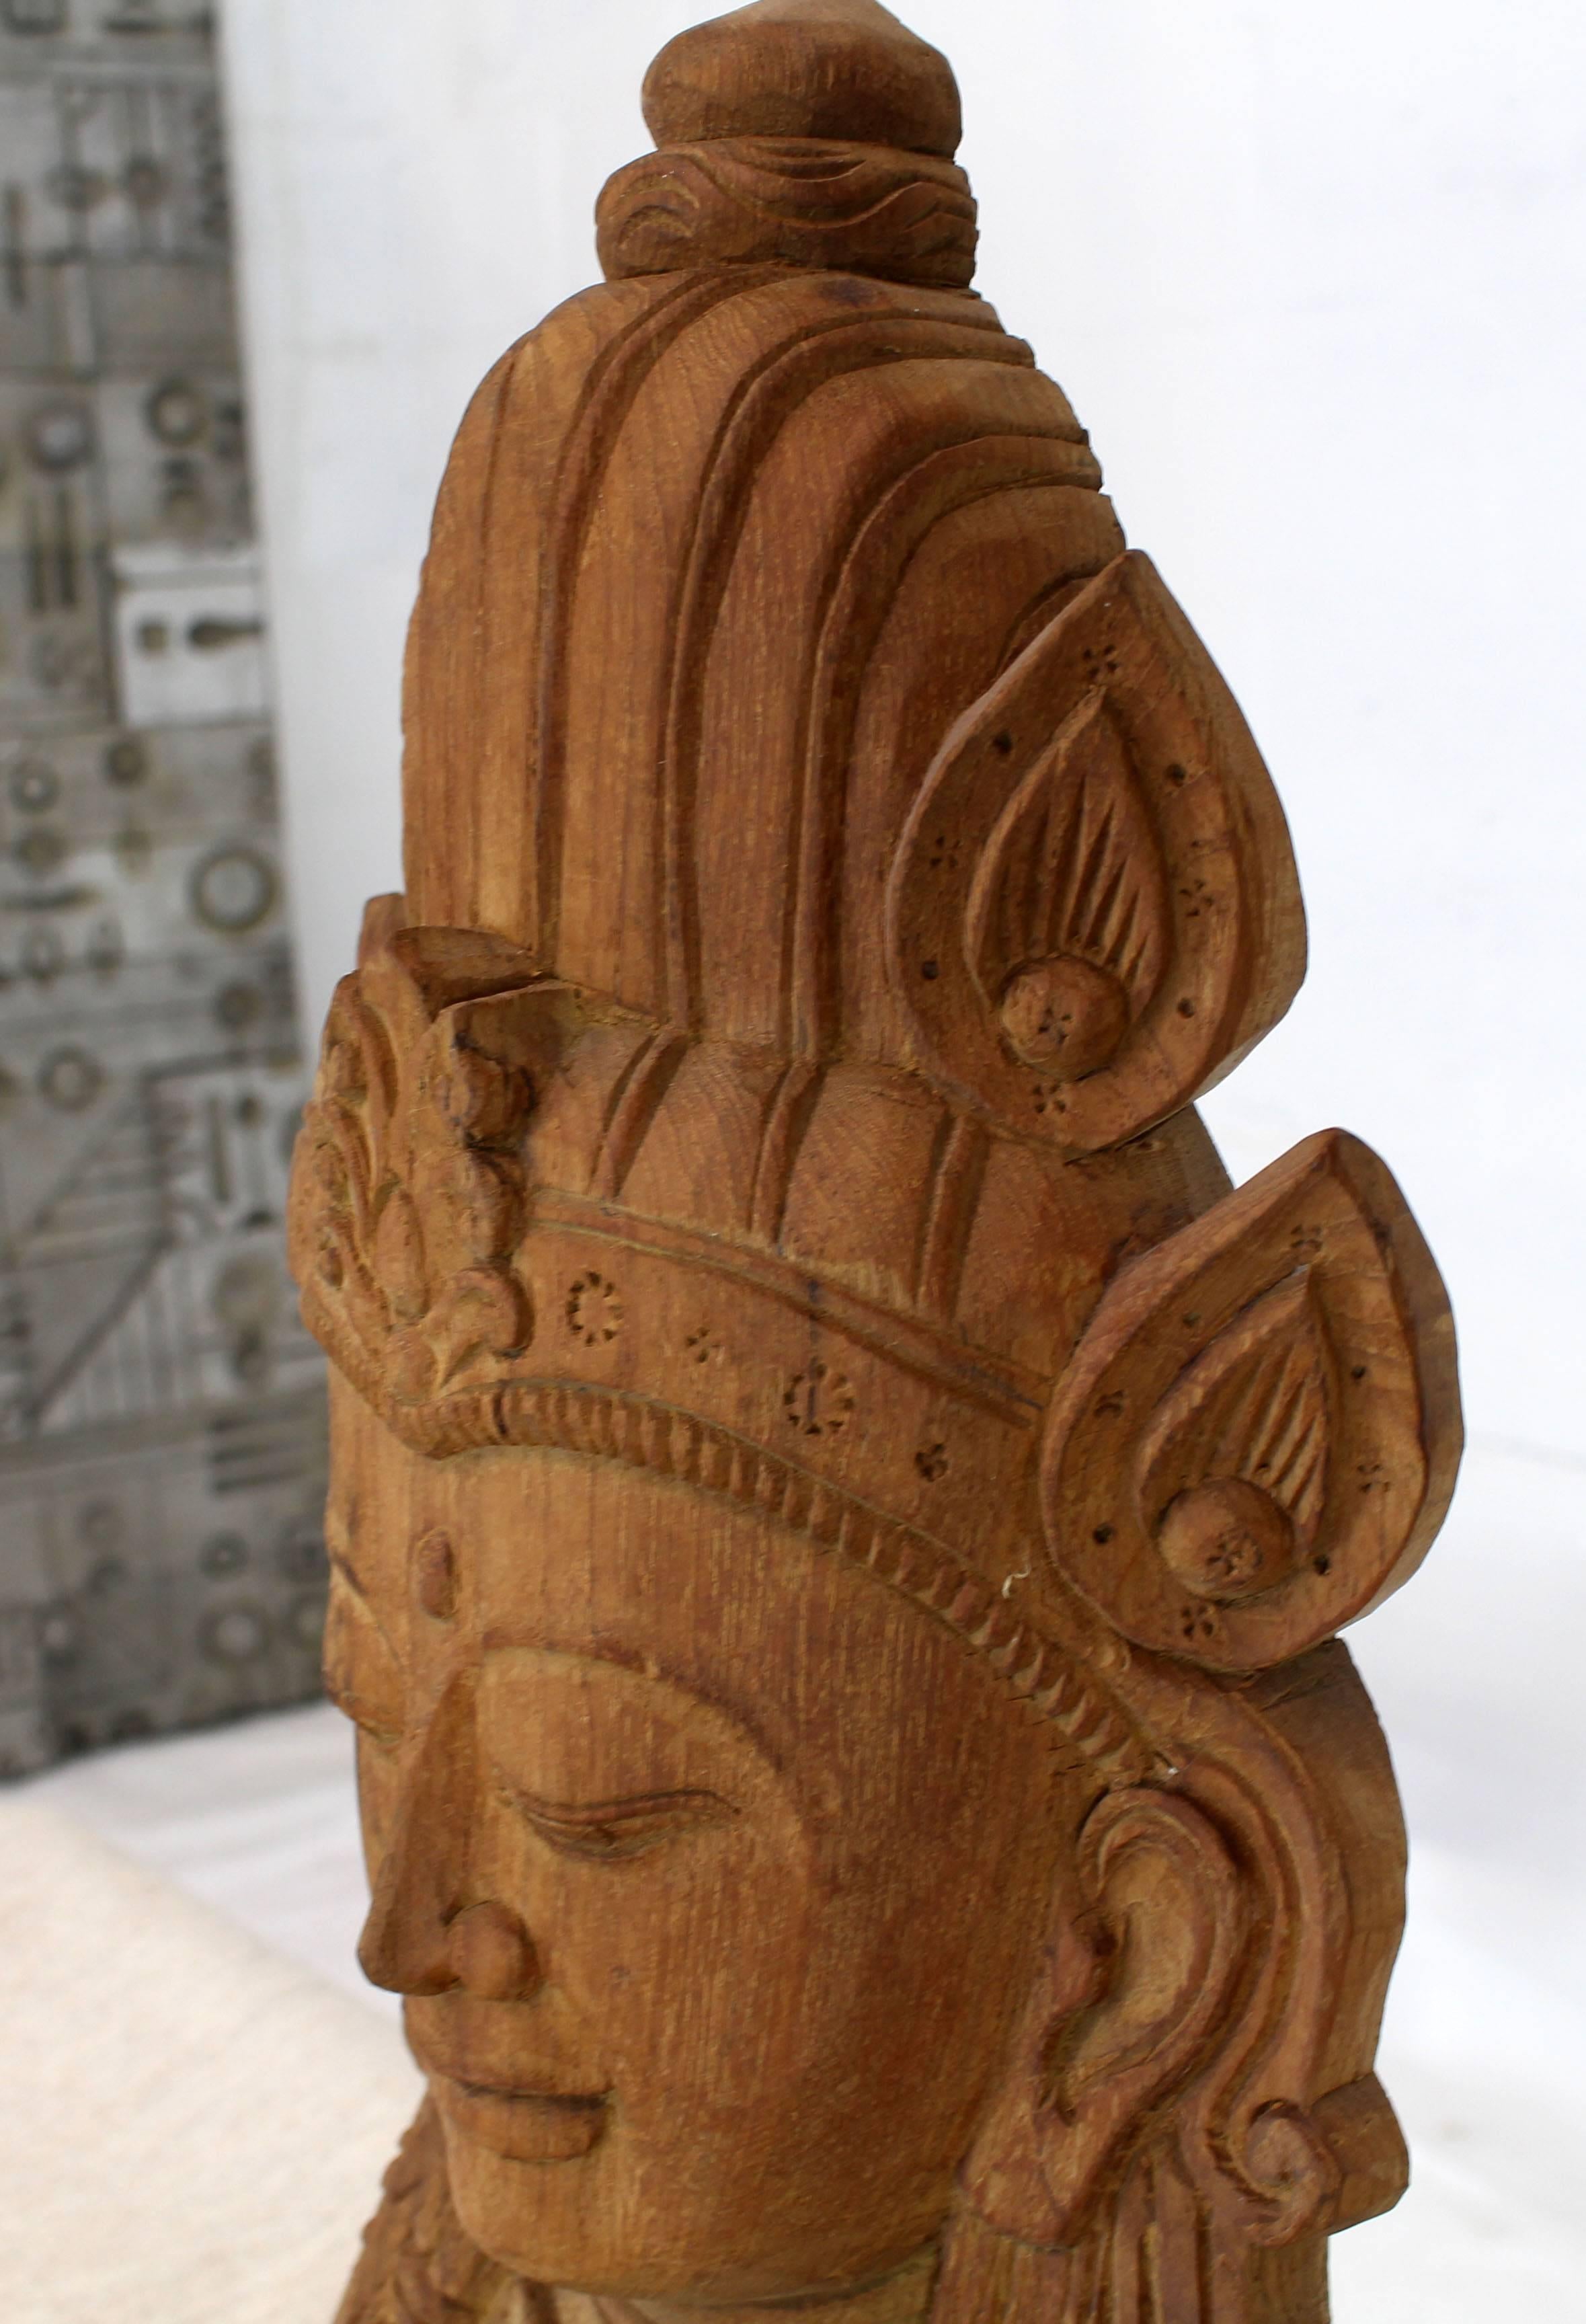 Very fine carving of Buddha face mask. Solid teak. Nice patina and aging details.